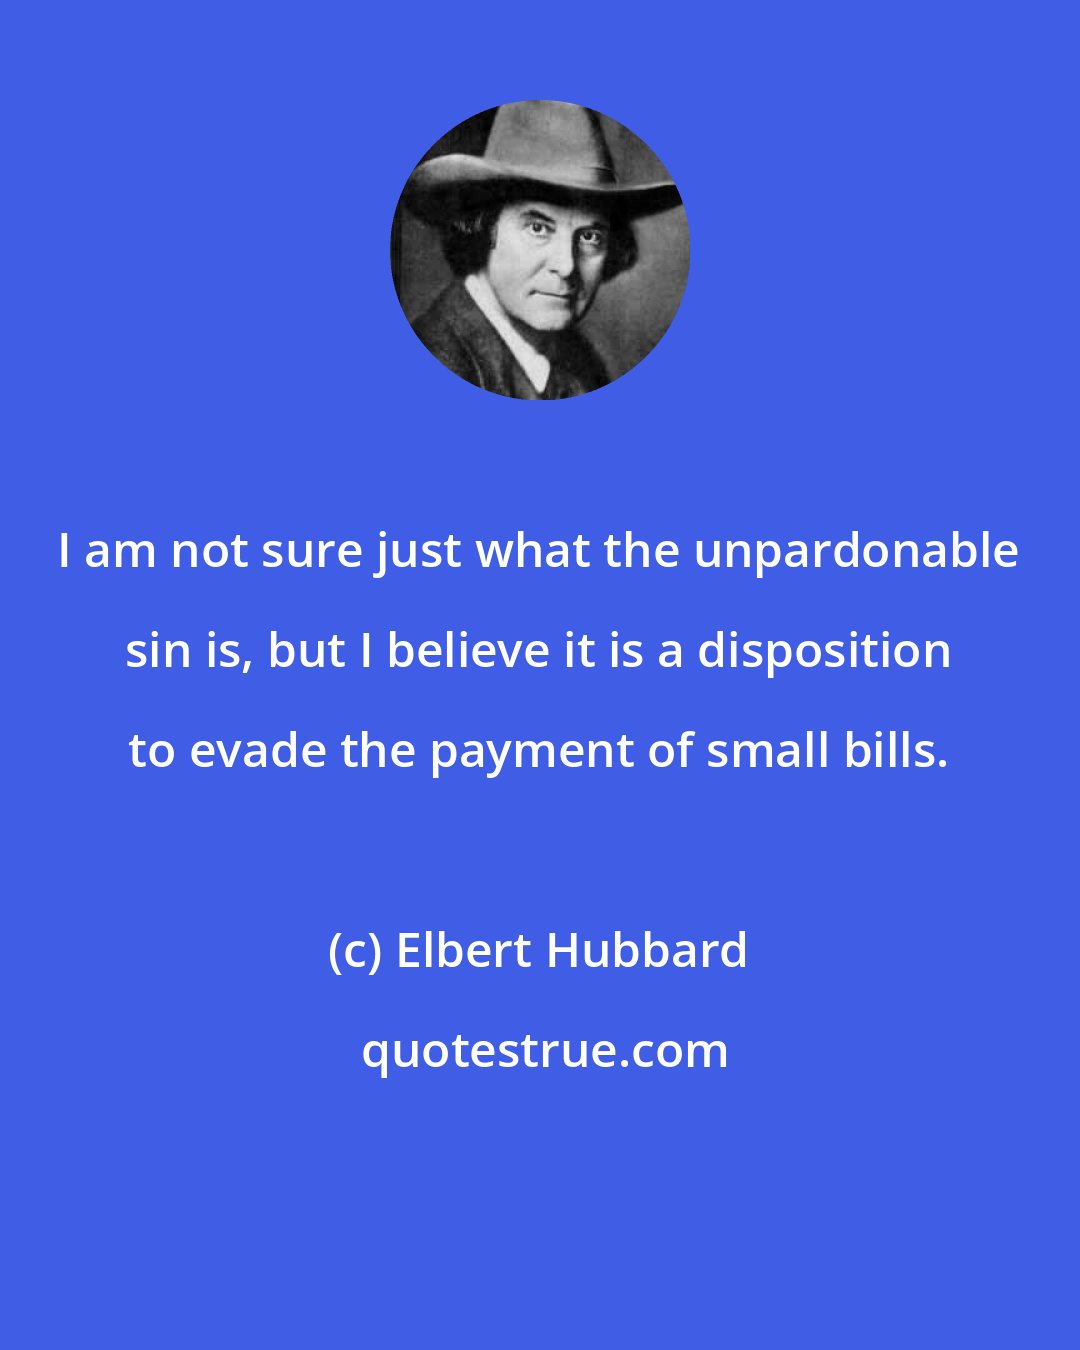 Elbert Hubbard: I am not sure just what the unpardonable sin is, but I believe it is a disposition to evade the payment of small bills.